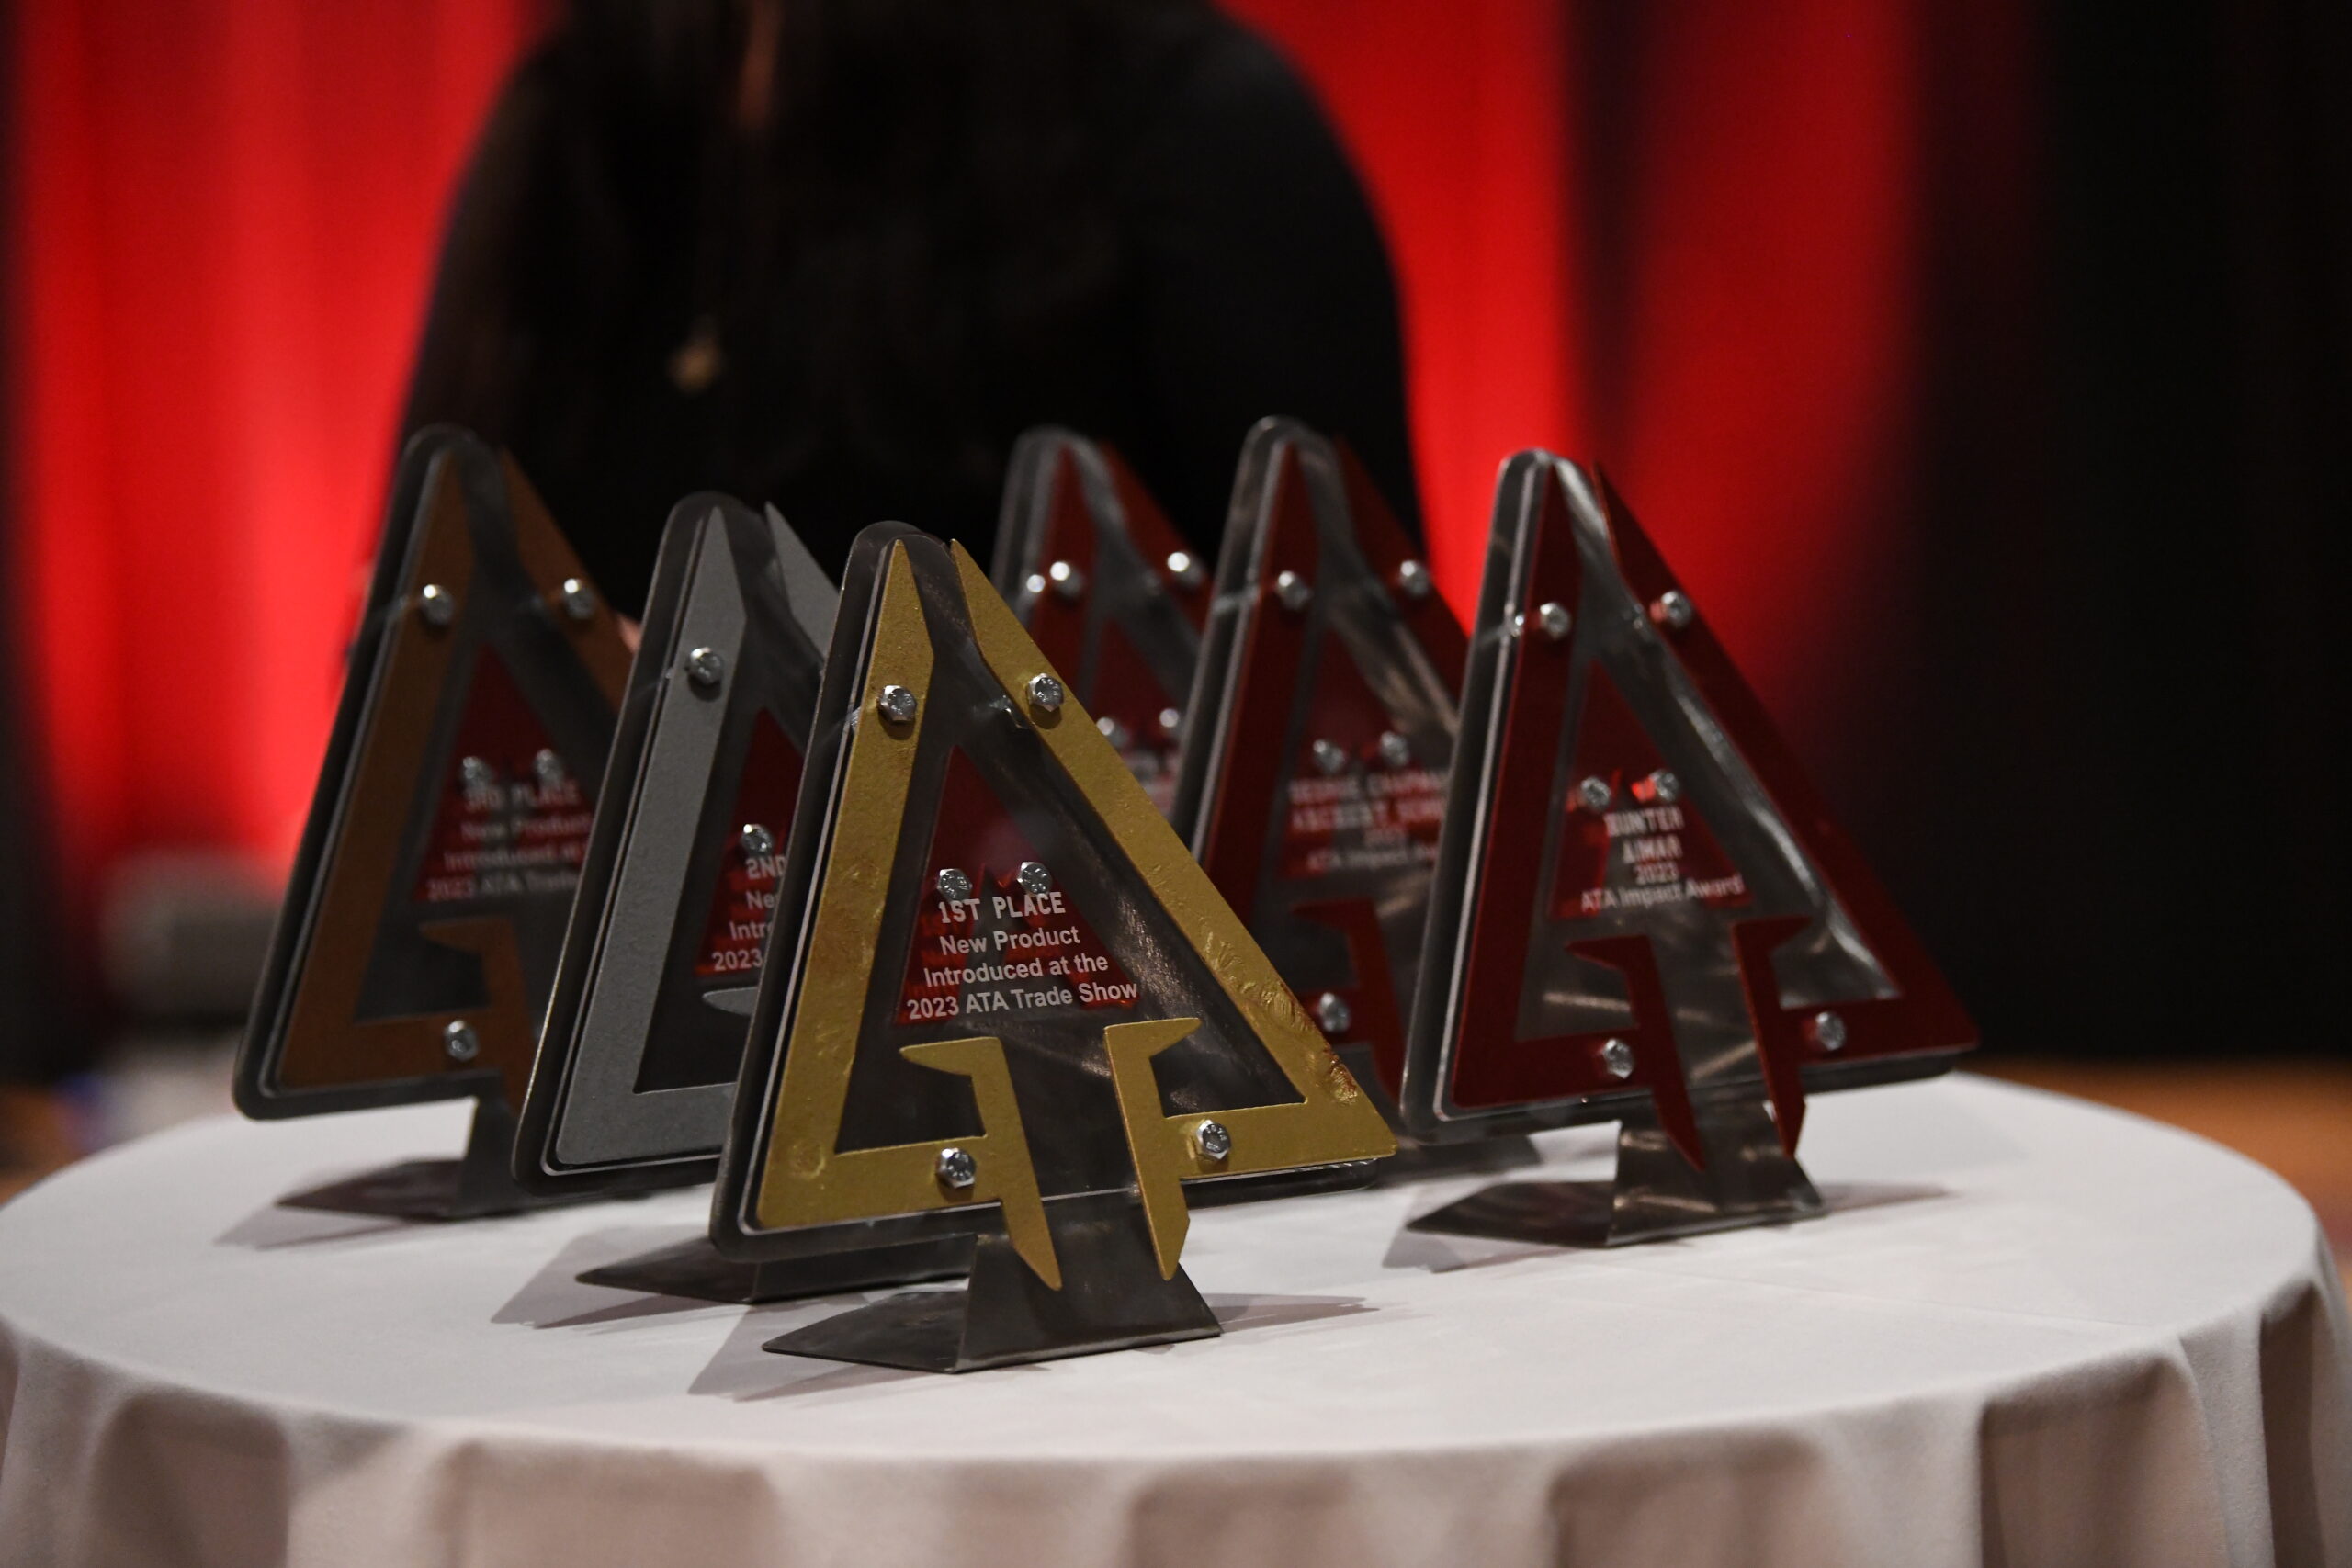 The ATA’s Industry Icon Award is presented to someone who is positively representing and protecting archery and bowhunting through significant contributions and volunteer work.